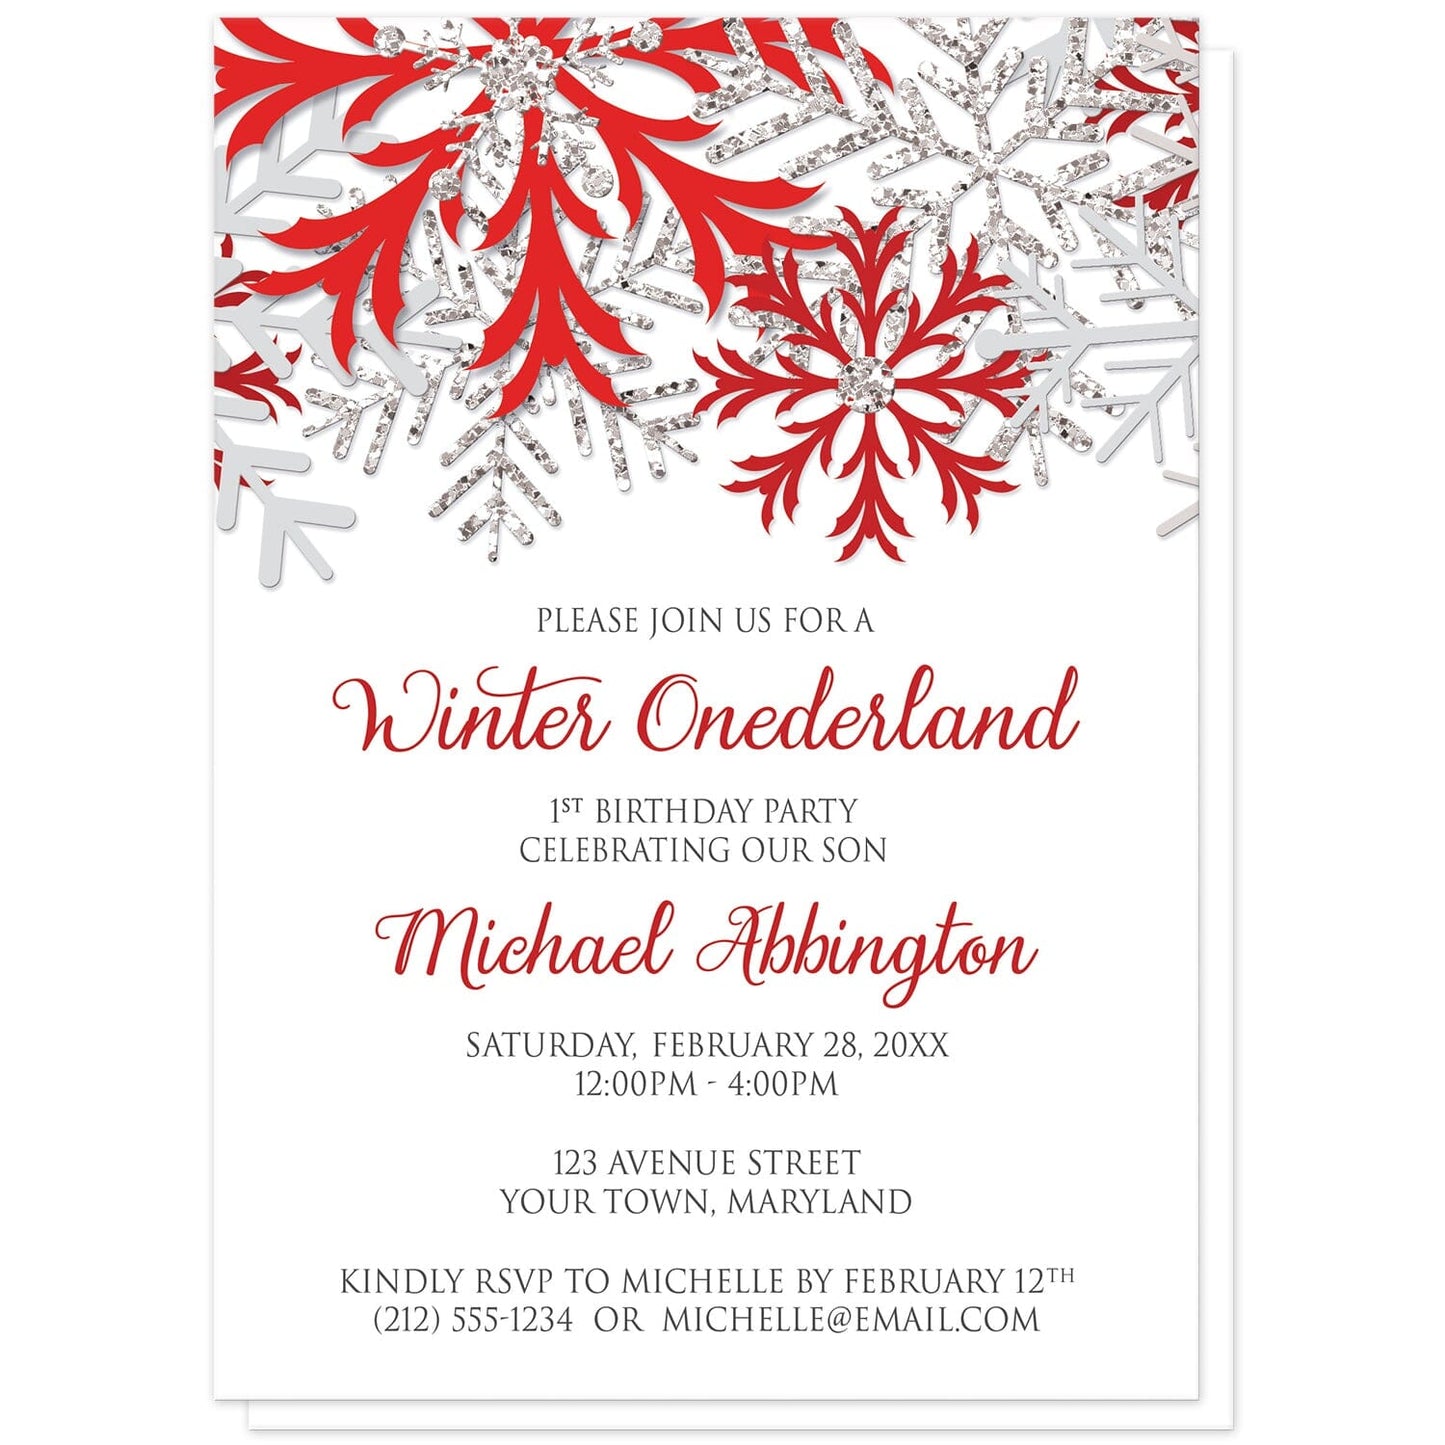 Red Silver Snowflake 1st Birthday Winter Onederland Invitations at Artistically Invited. Pretty red silver snowflake 1st birthday Winter Onederland invitations designed with red, darker red, silver-colored glitter-illustrated, and light gray snowflakes along the top of the invitations. Your personalized 1st birthday party details are custom printed in red and gray on white below the snowflakes.